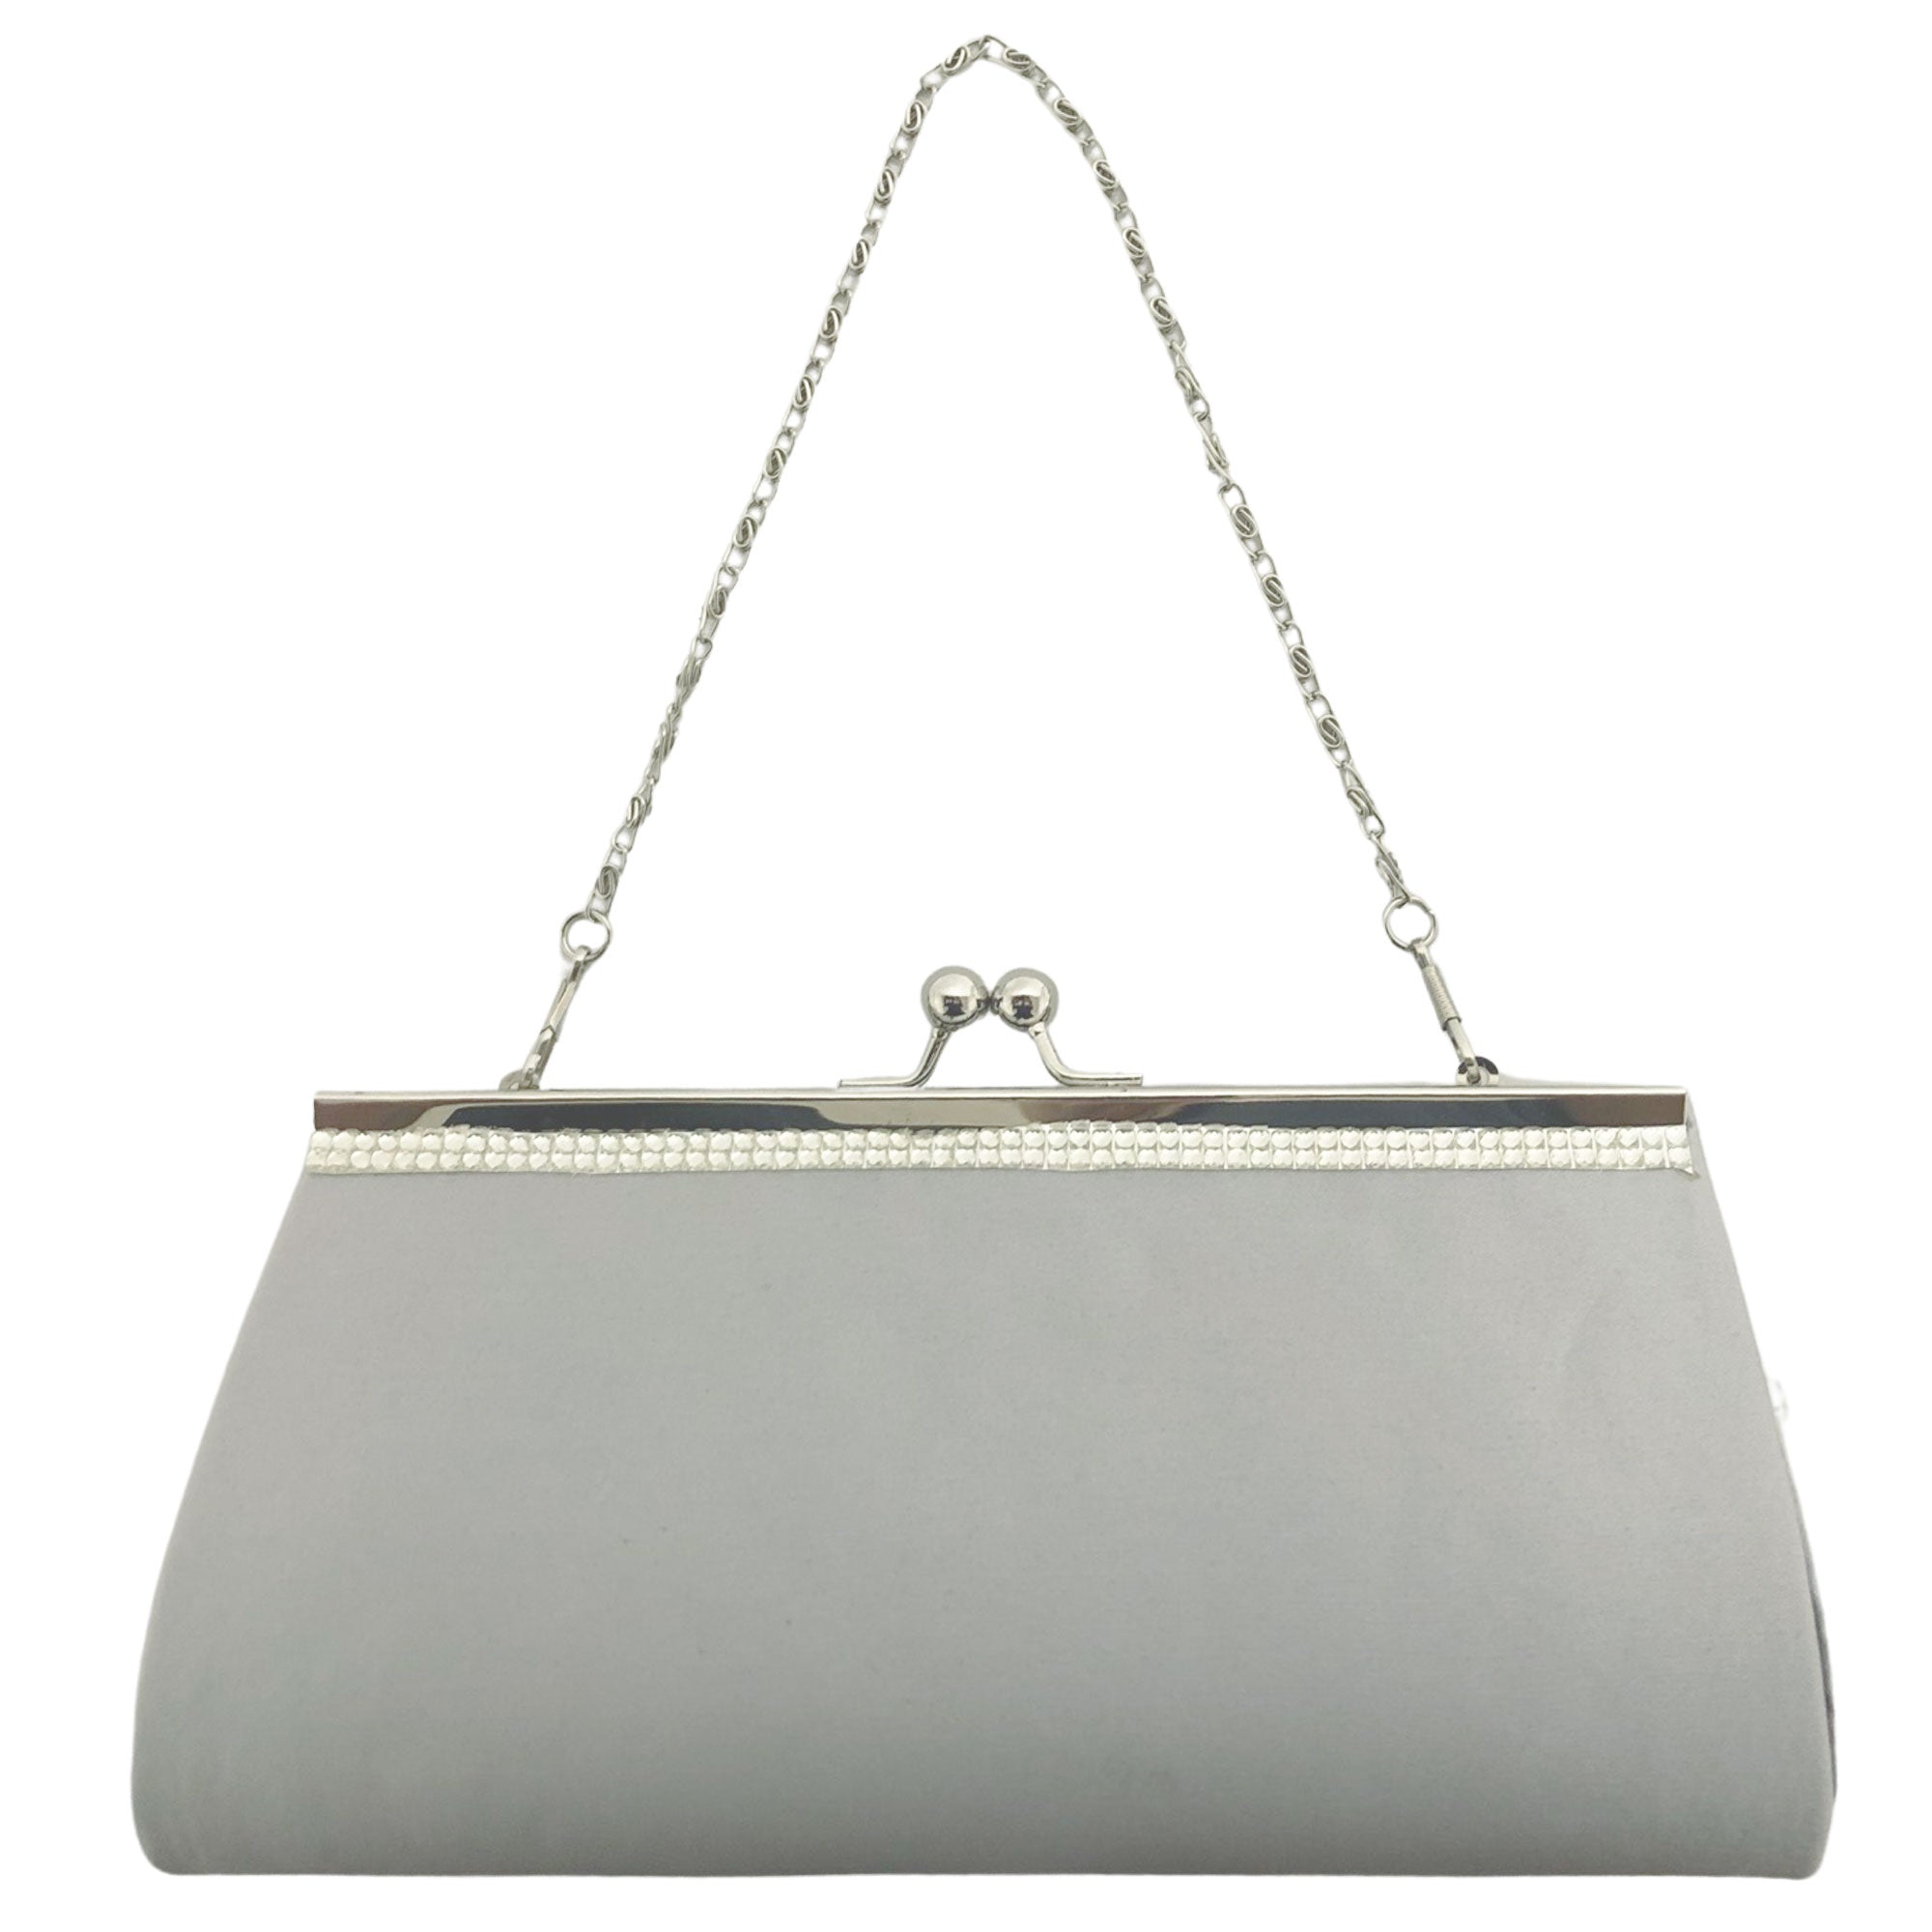 CLEARANCE EVENING BAG IN SILVER (CASE OF 48 - $1.50 / PIECE)  Wholesale Silver Evening Bag SKU: EB1020-SOL-SIL-48